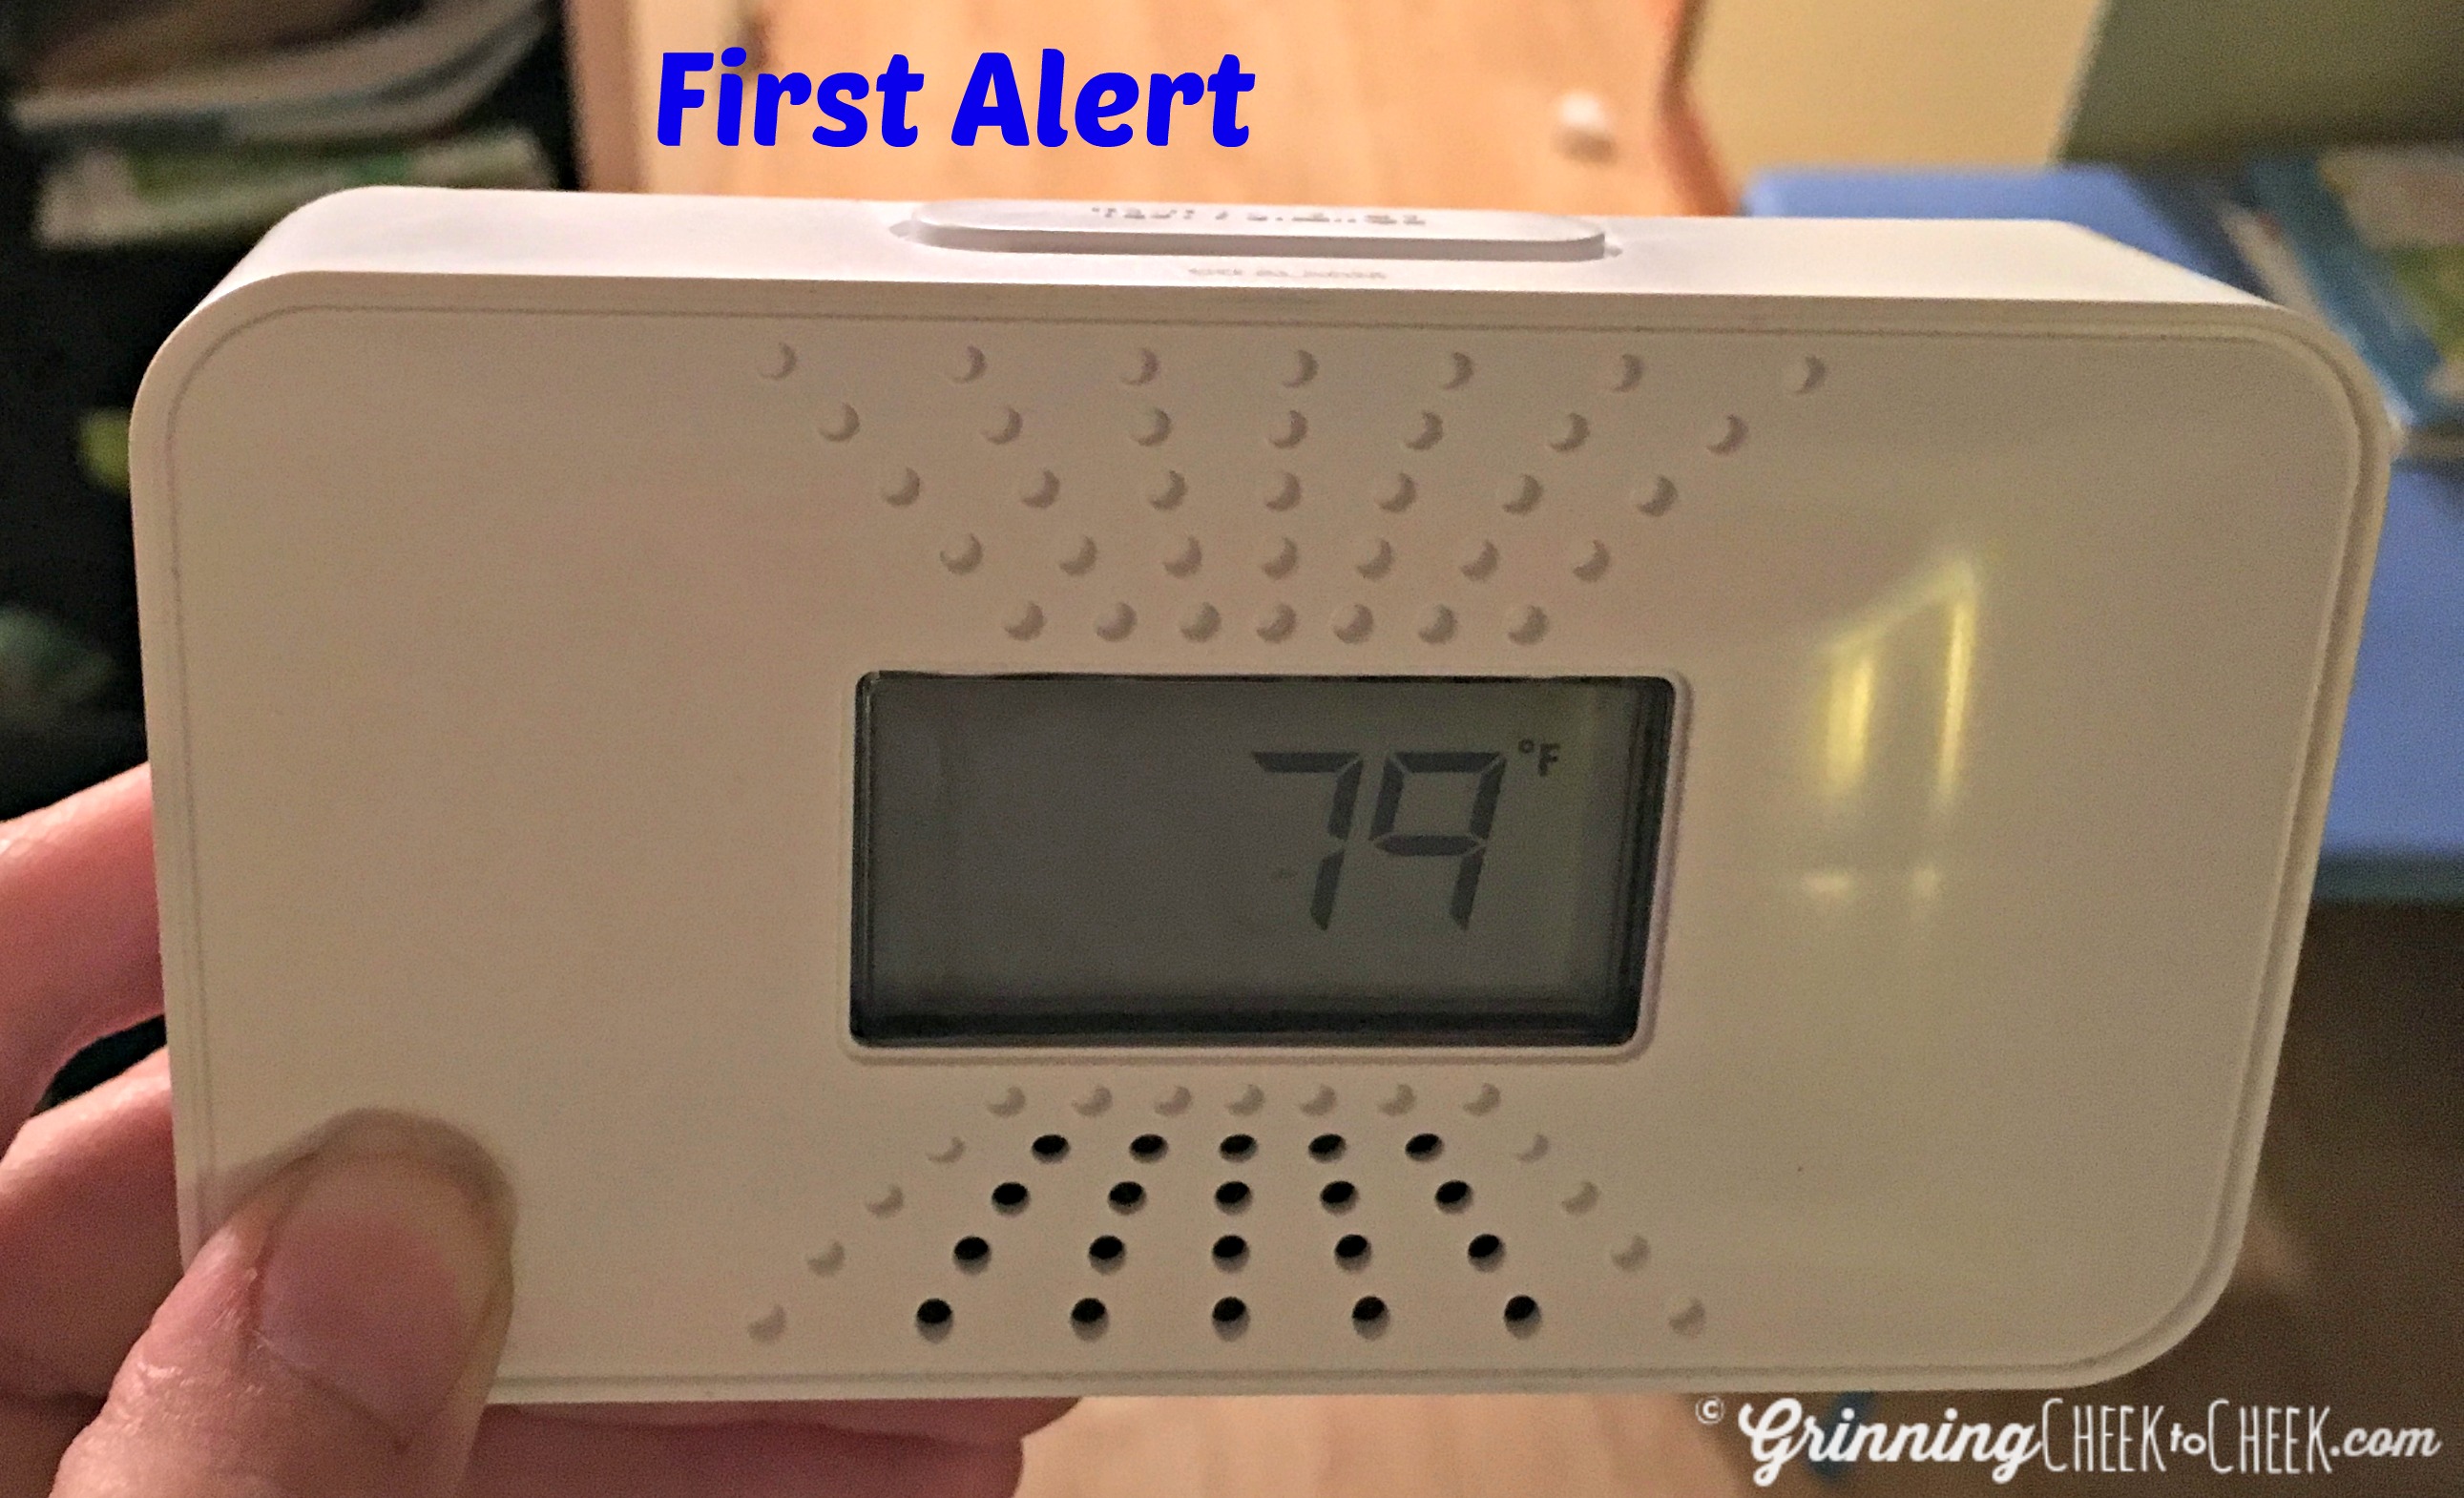 Carbon Monoxide Detectors- Protect your Family with First Alert